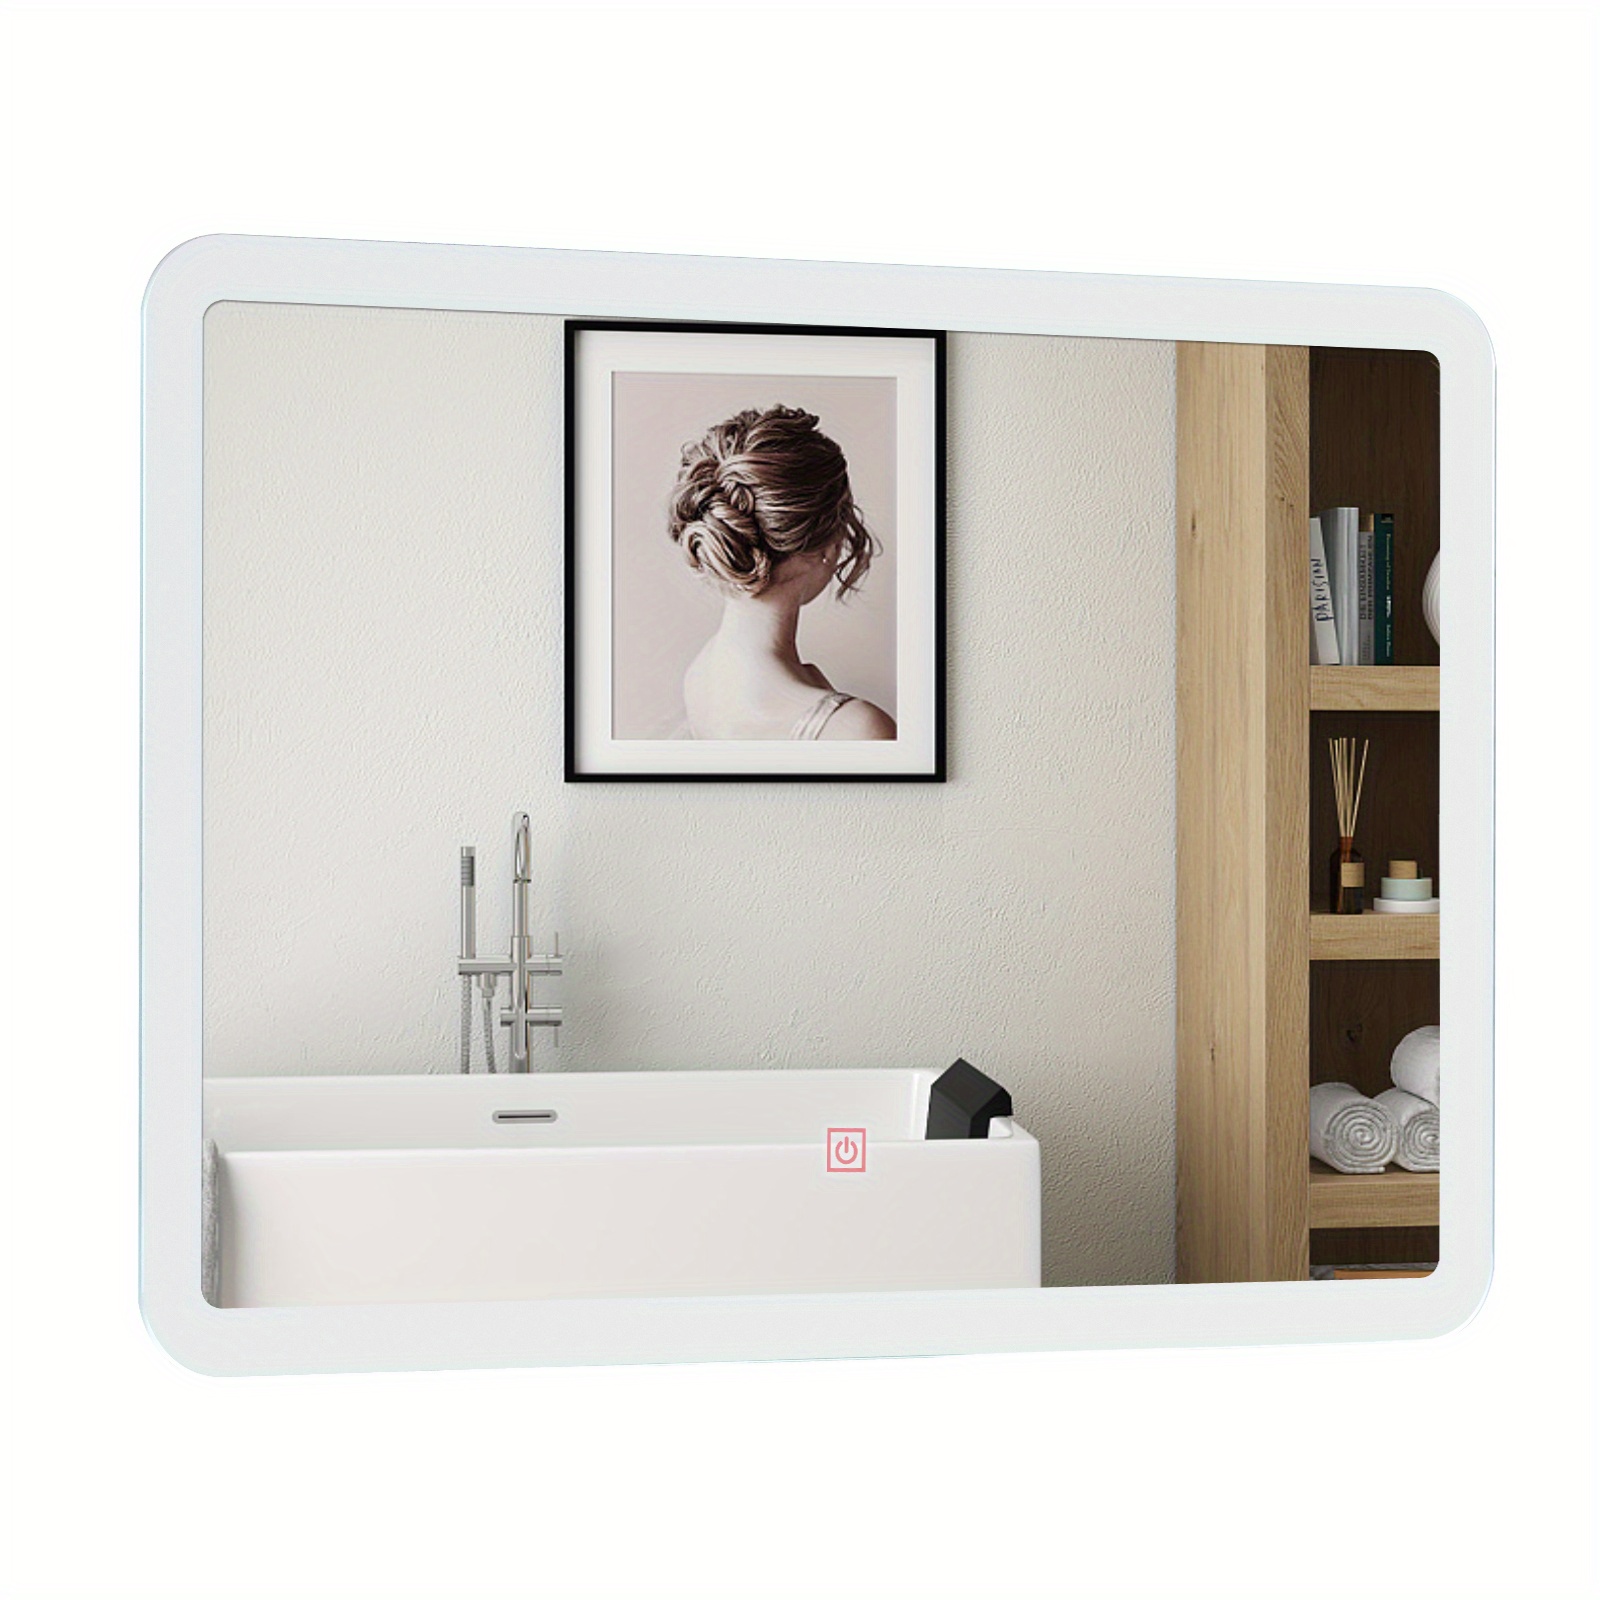 

Lifezeal Wall Mounted Rectangle Bathroom Led Mirror Dimmable Touch 3-color Frameless